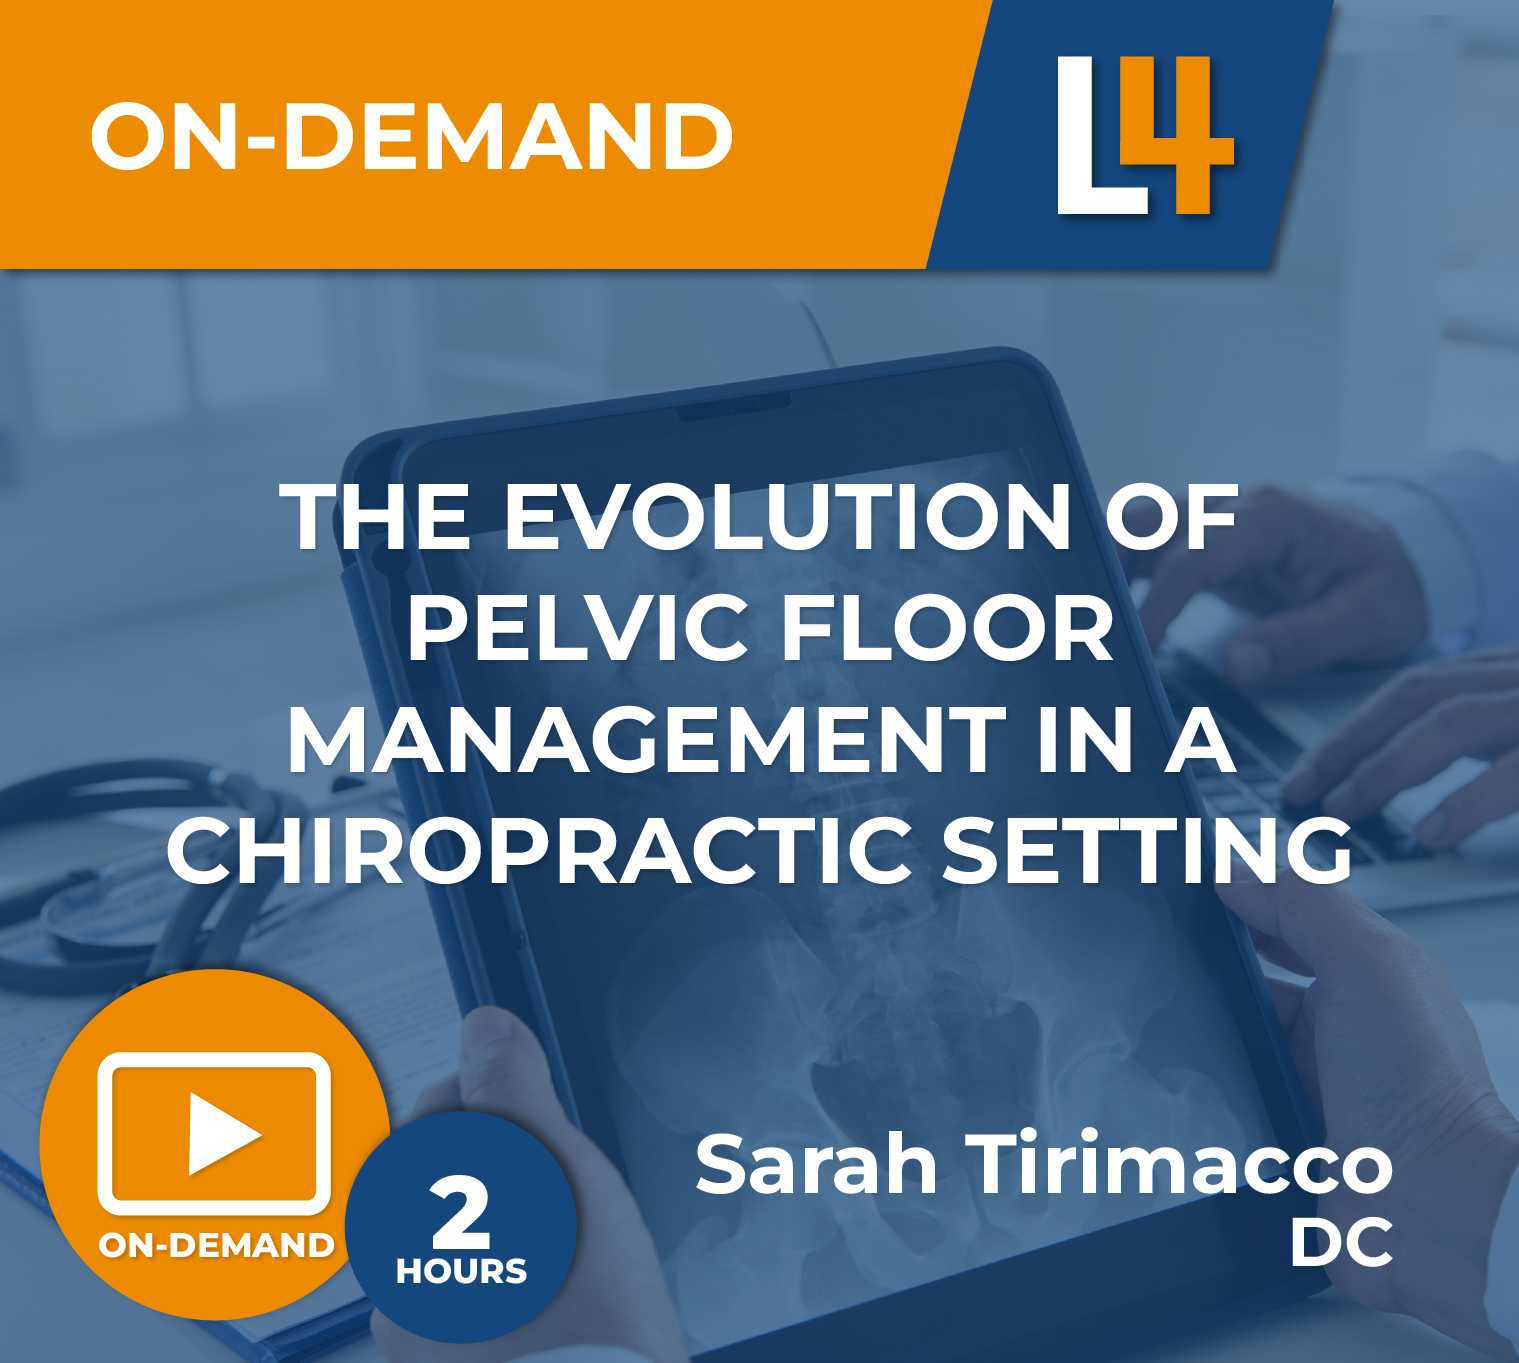 The Evolution of Pelvic Floor Management in a Chiropractic Setting